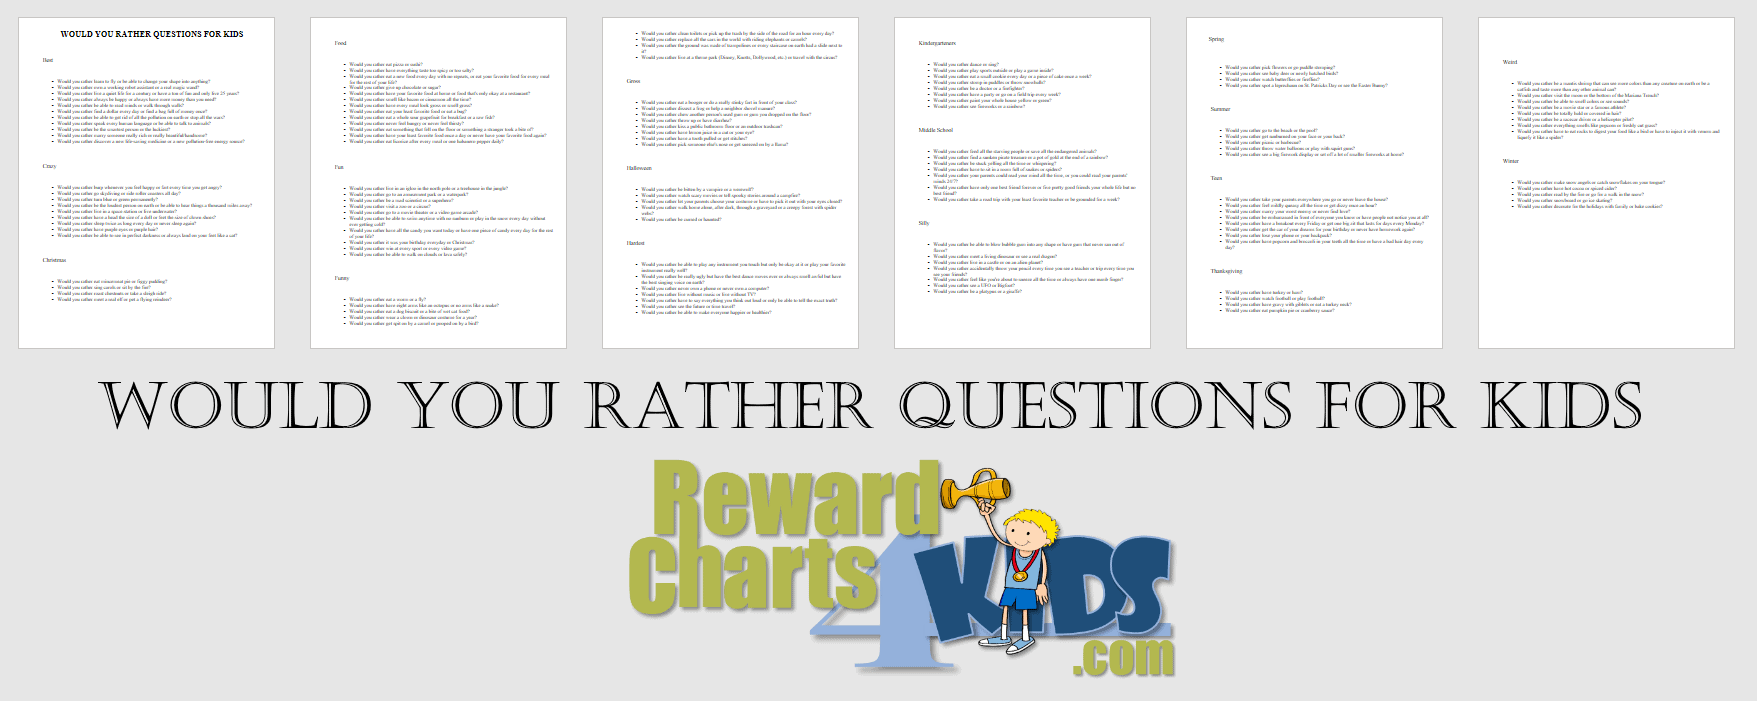 Woudl you rather questions for kids PDF